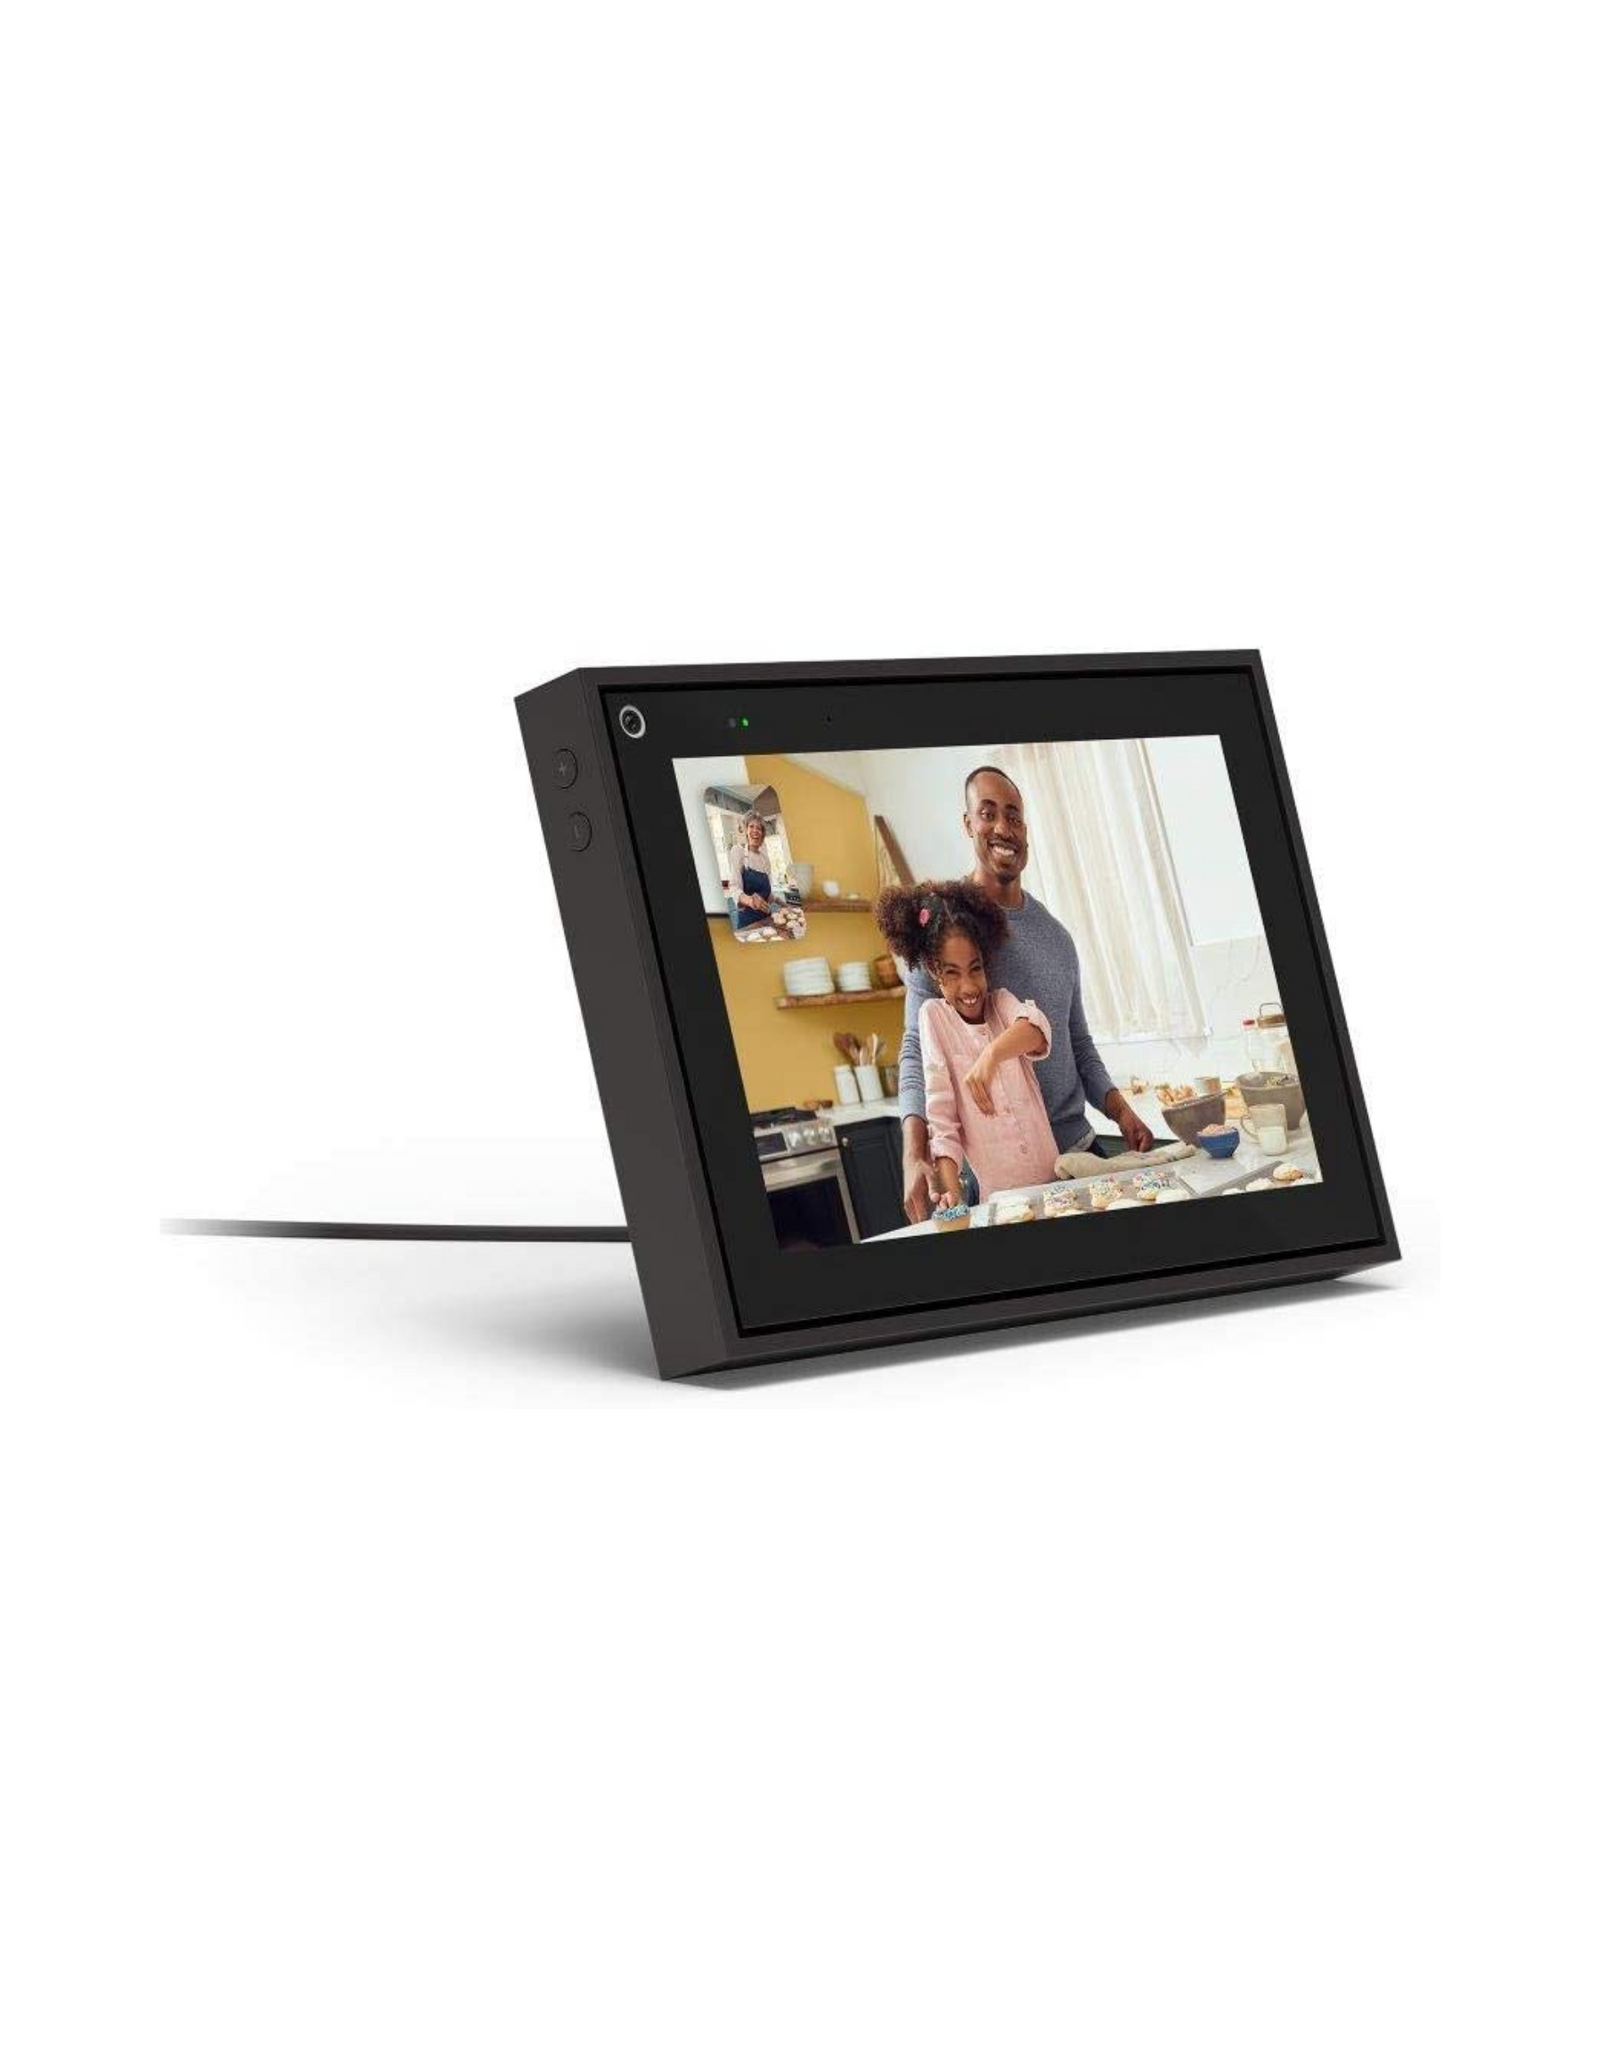 Facebook Portal Mini, 8 Inch Touch Screen Display with Alexa - Black